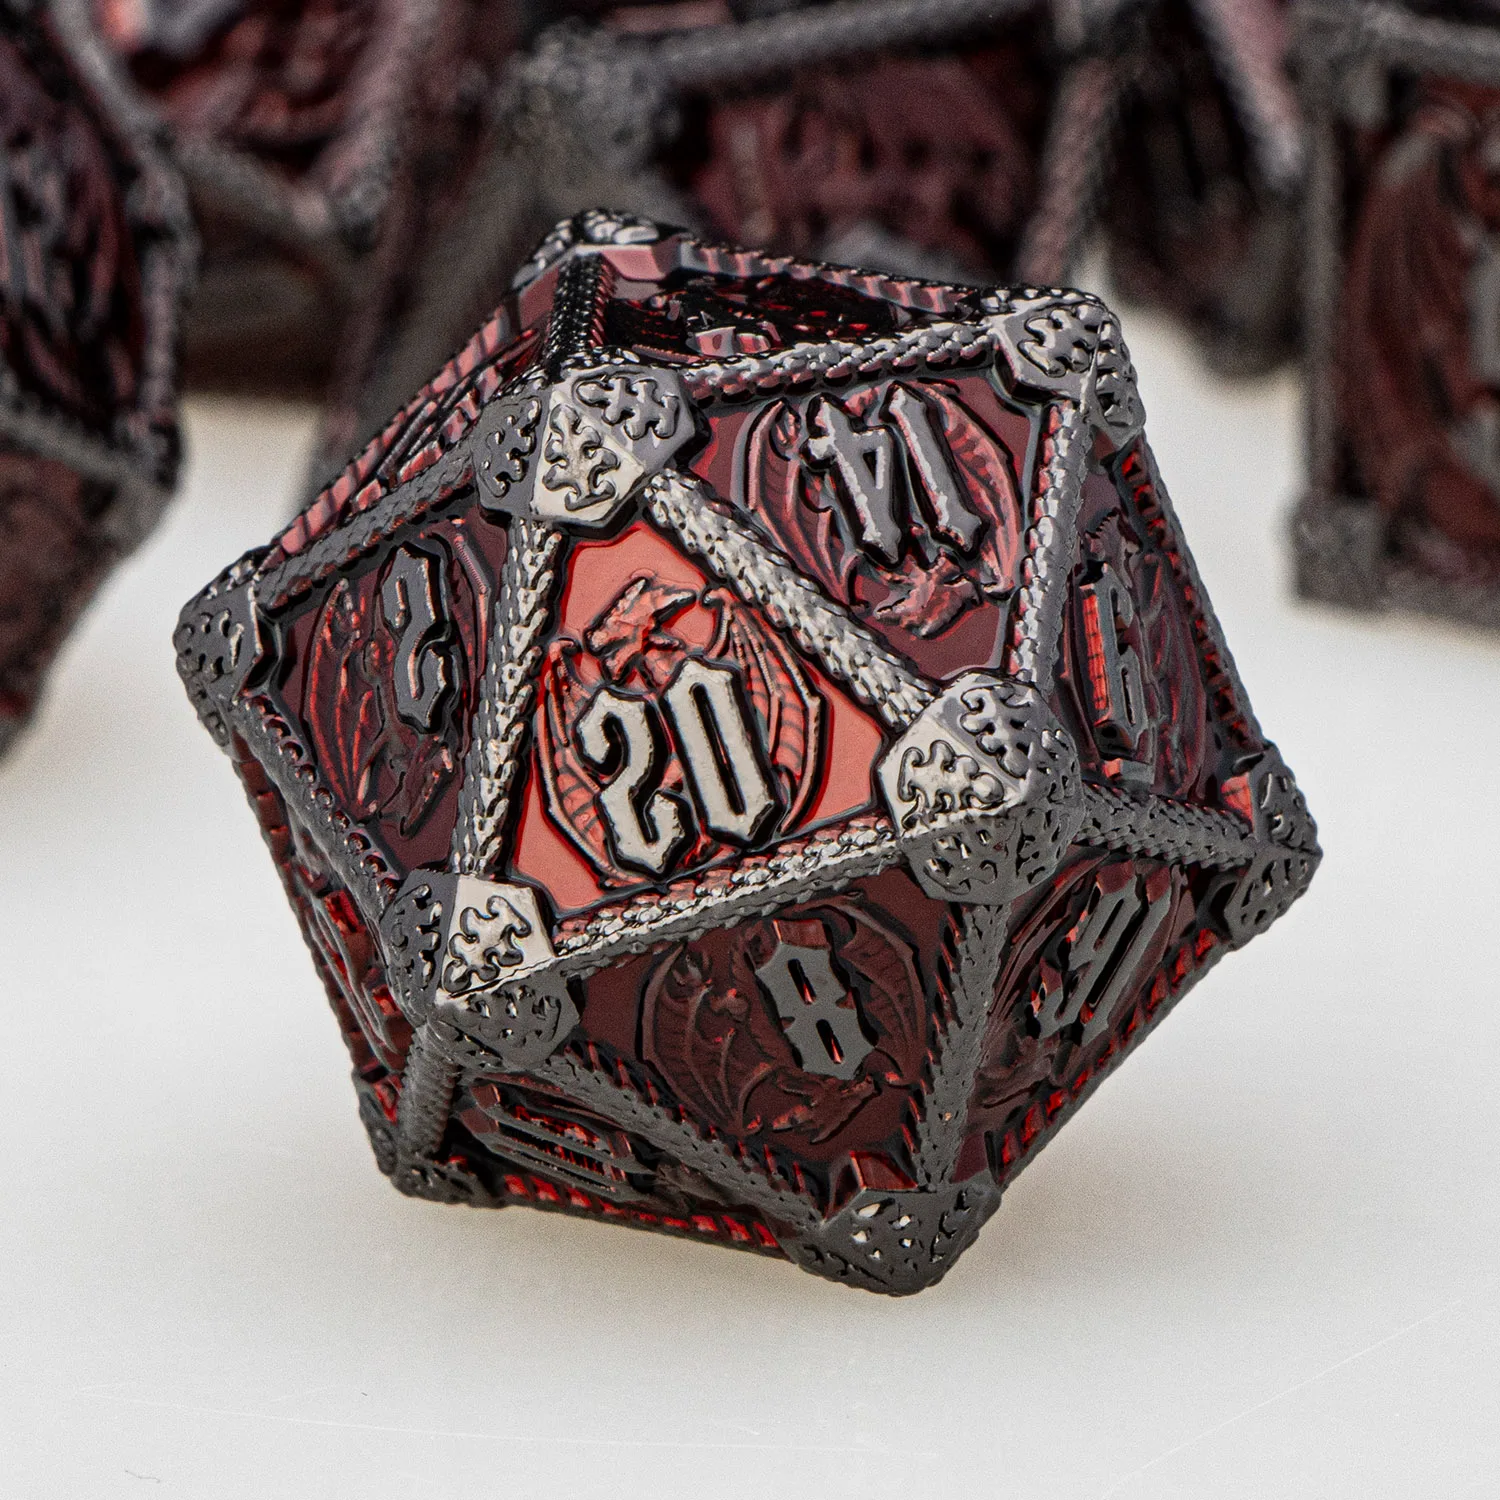 Metal DND Dice Dungeon and Dragon D&D Polyhedral Dice RPG D and D Dragon Dice Set Role Playing Games D20 D12 D10 D8 D6-animated-img